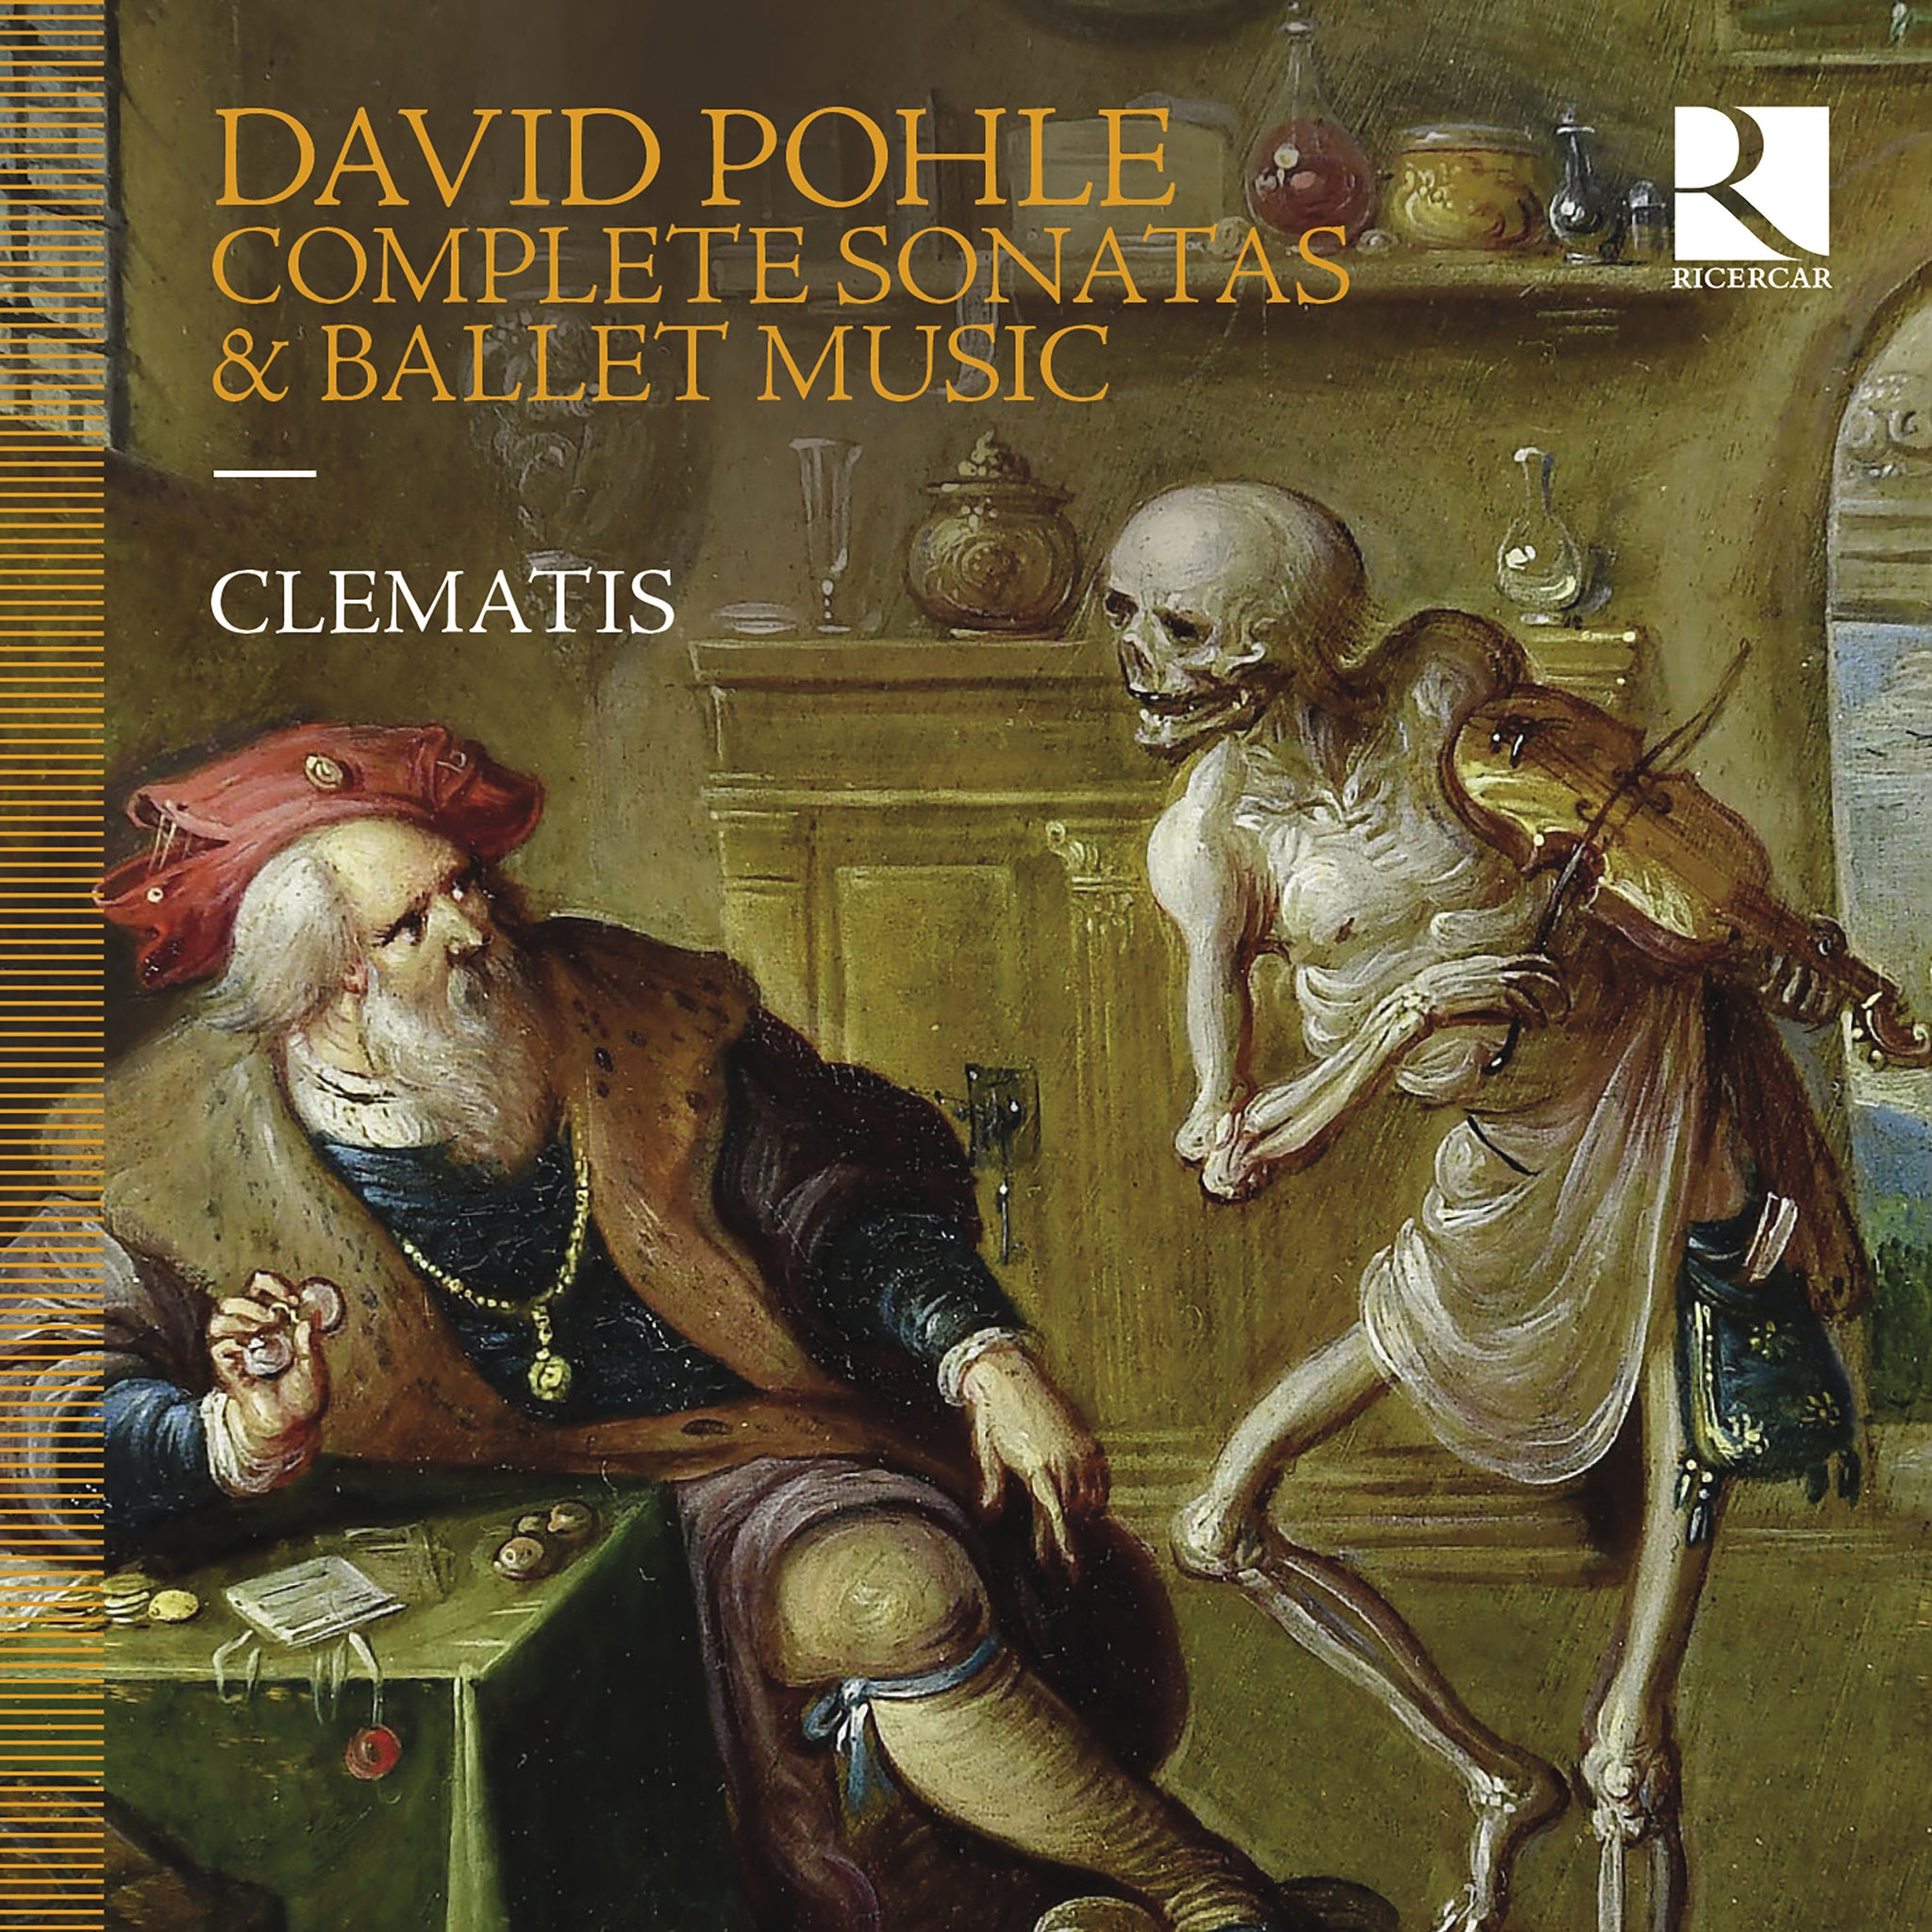 Pohle: Complete Sonatas & Ballet Music / Clematis